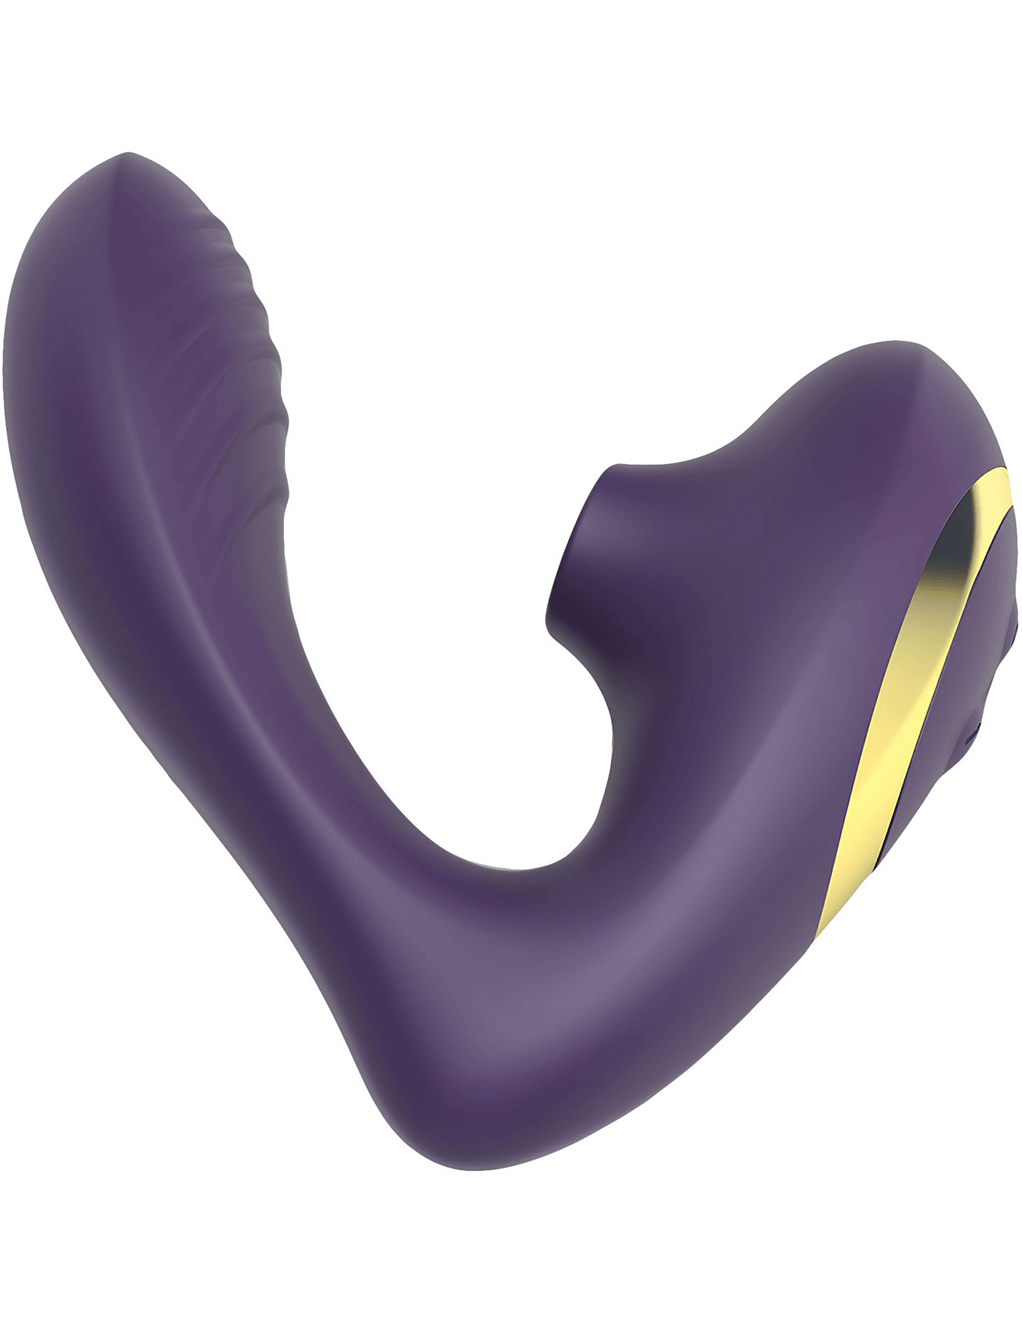 TRACY'S DOG OG CLITORAL SUCKING VIBRATOR WITH PLEASURE AIR & G-SPOT VIBRATION - PURPLE